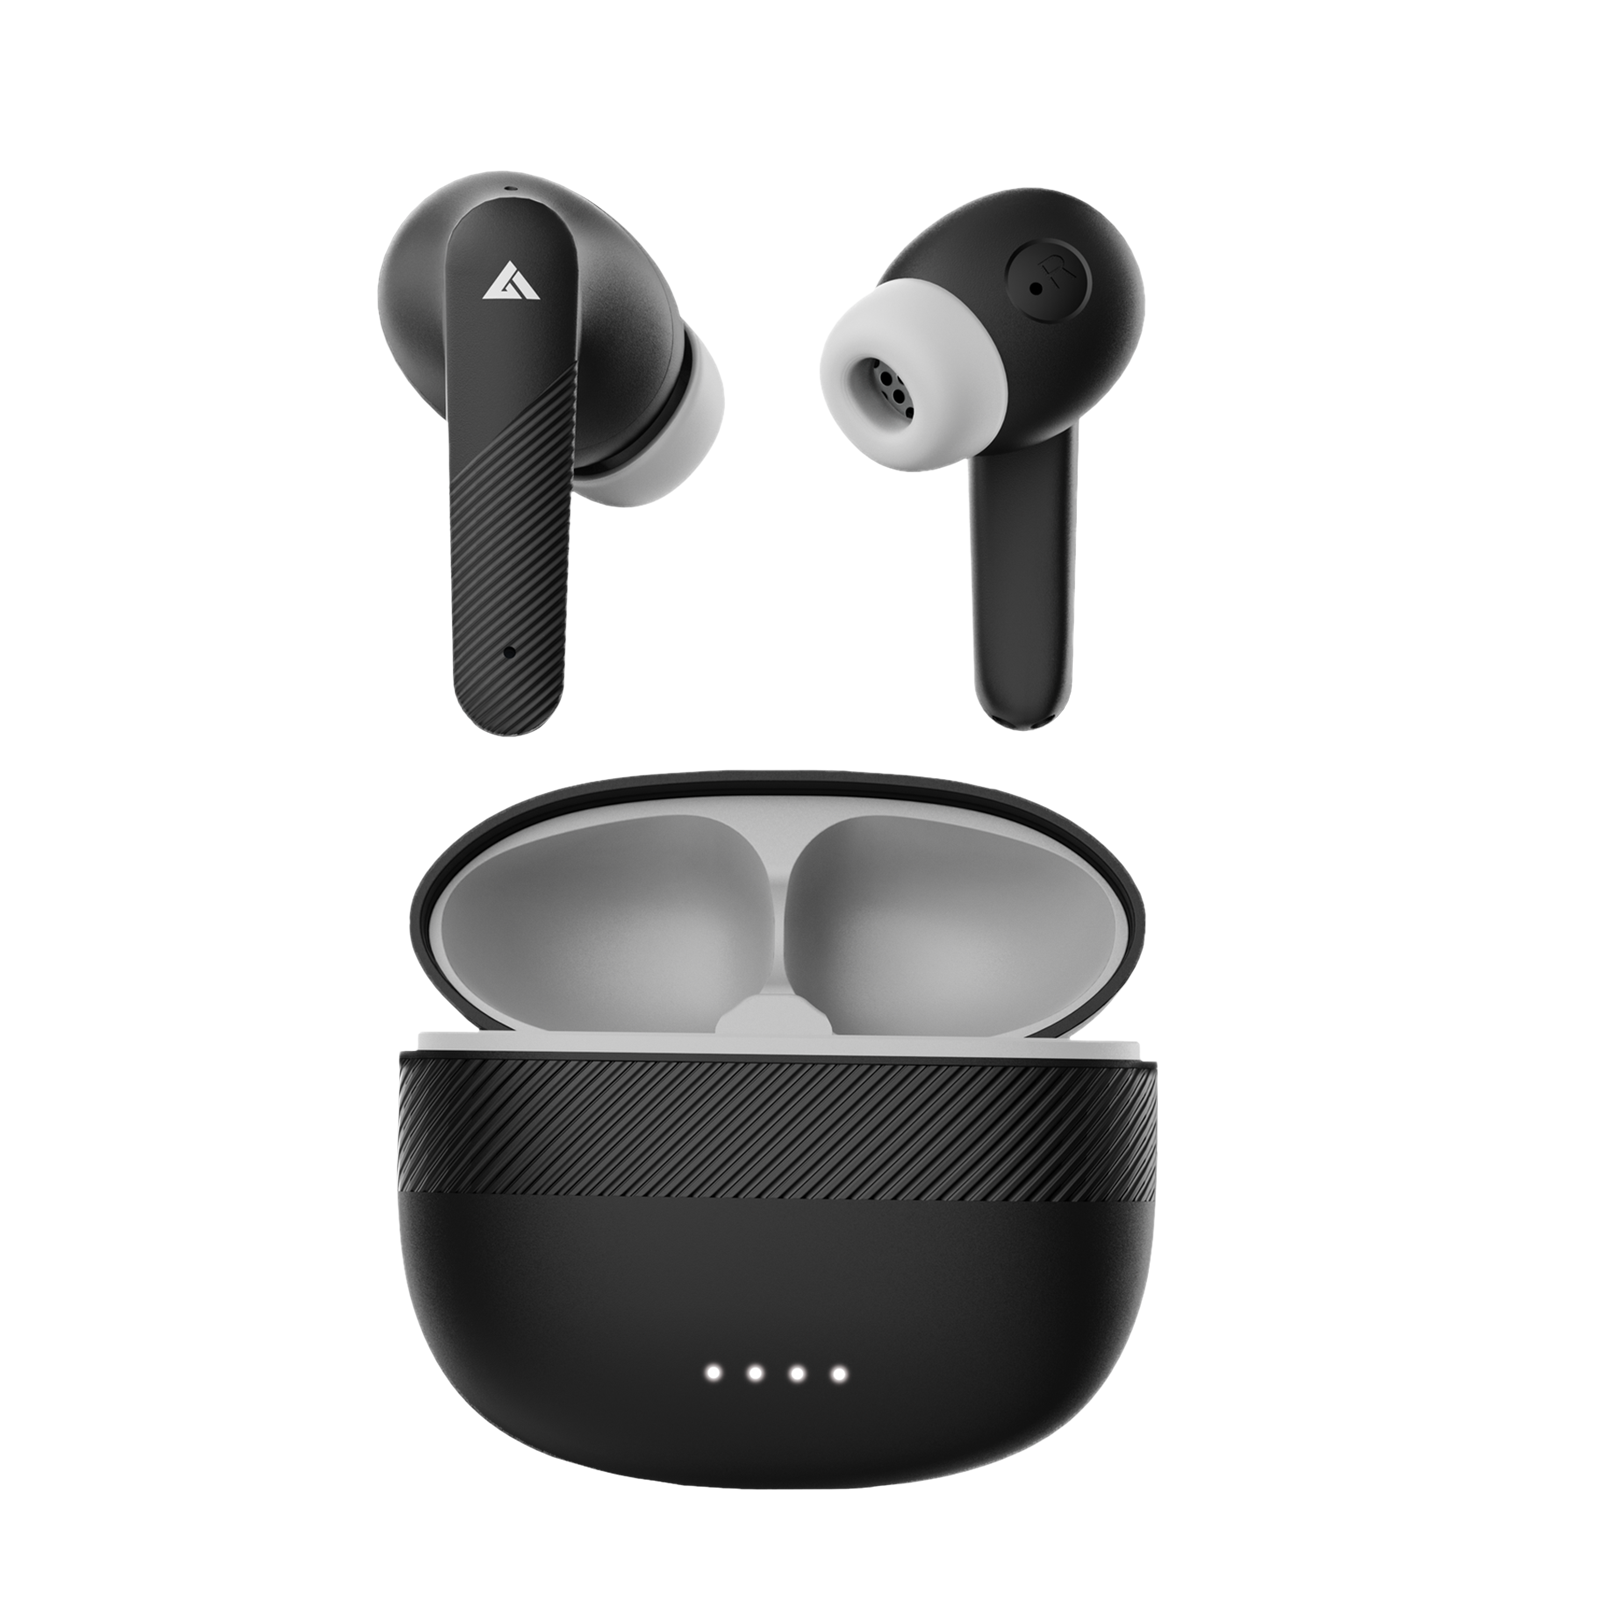 BOULT AUDIO X60 TWS Earbuds with Active Noise Cancellation (IPX5 Water Resistant, Zen Quad Mic, Black)